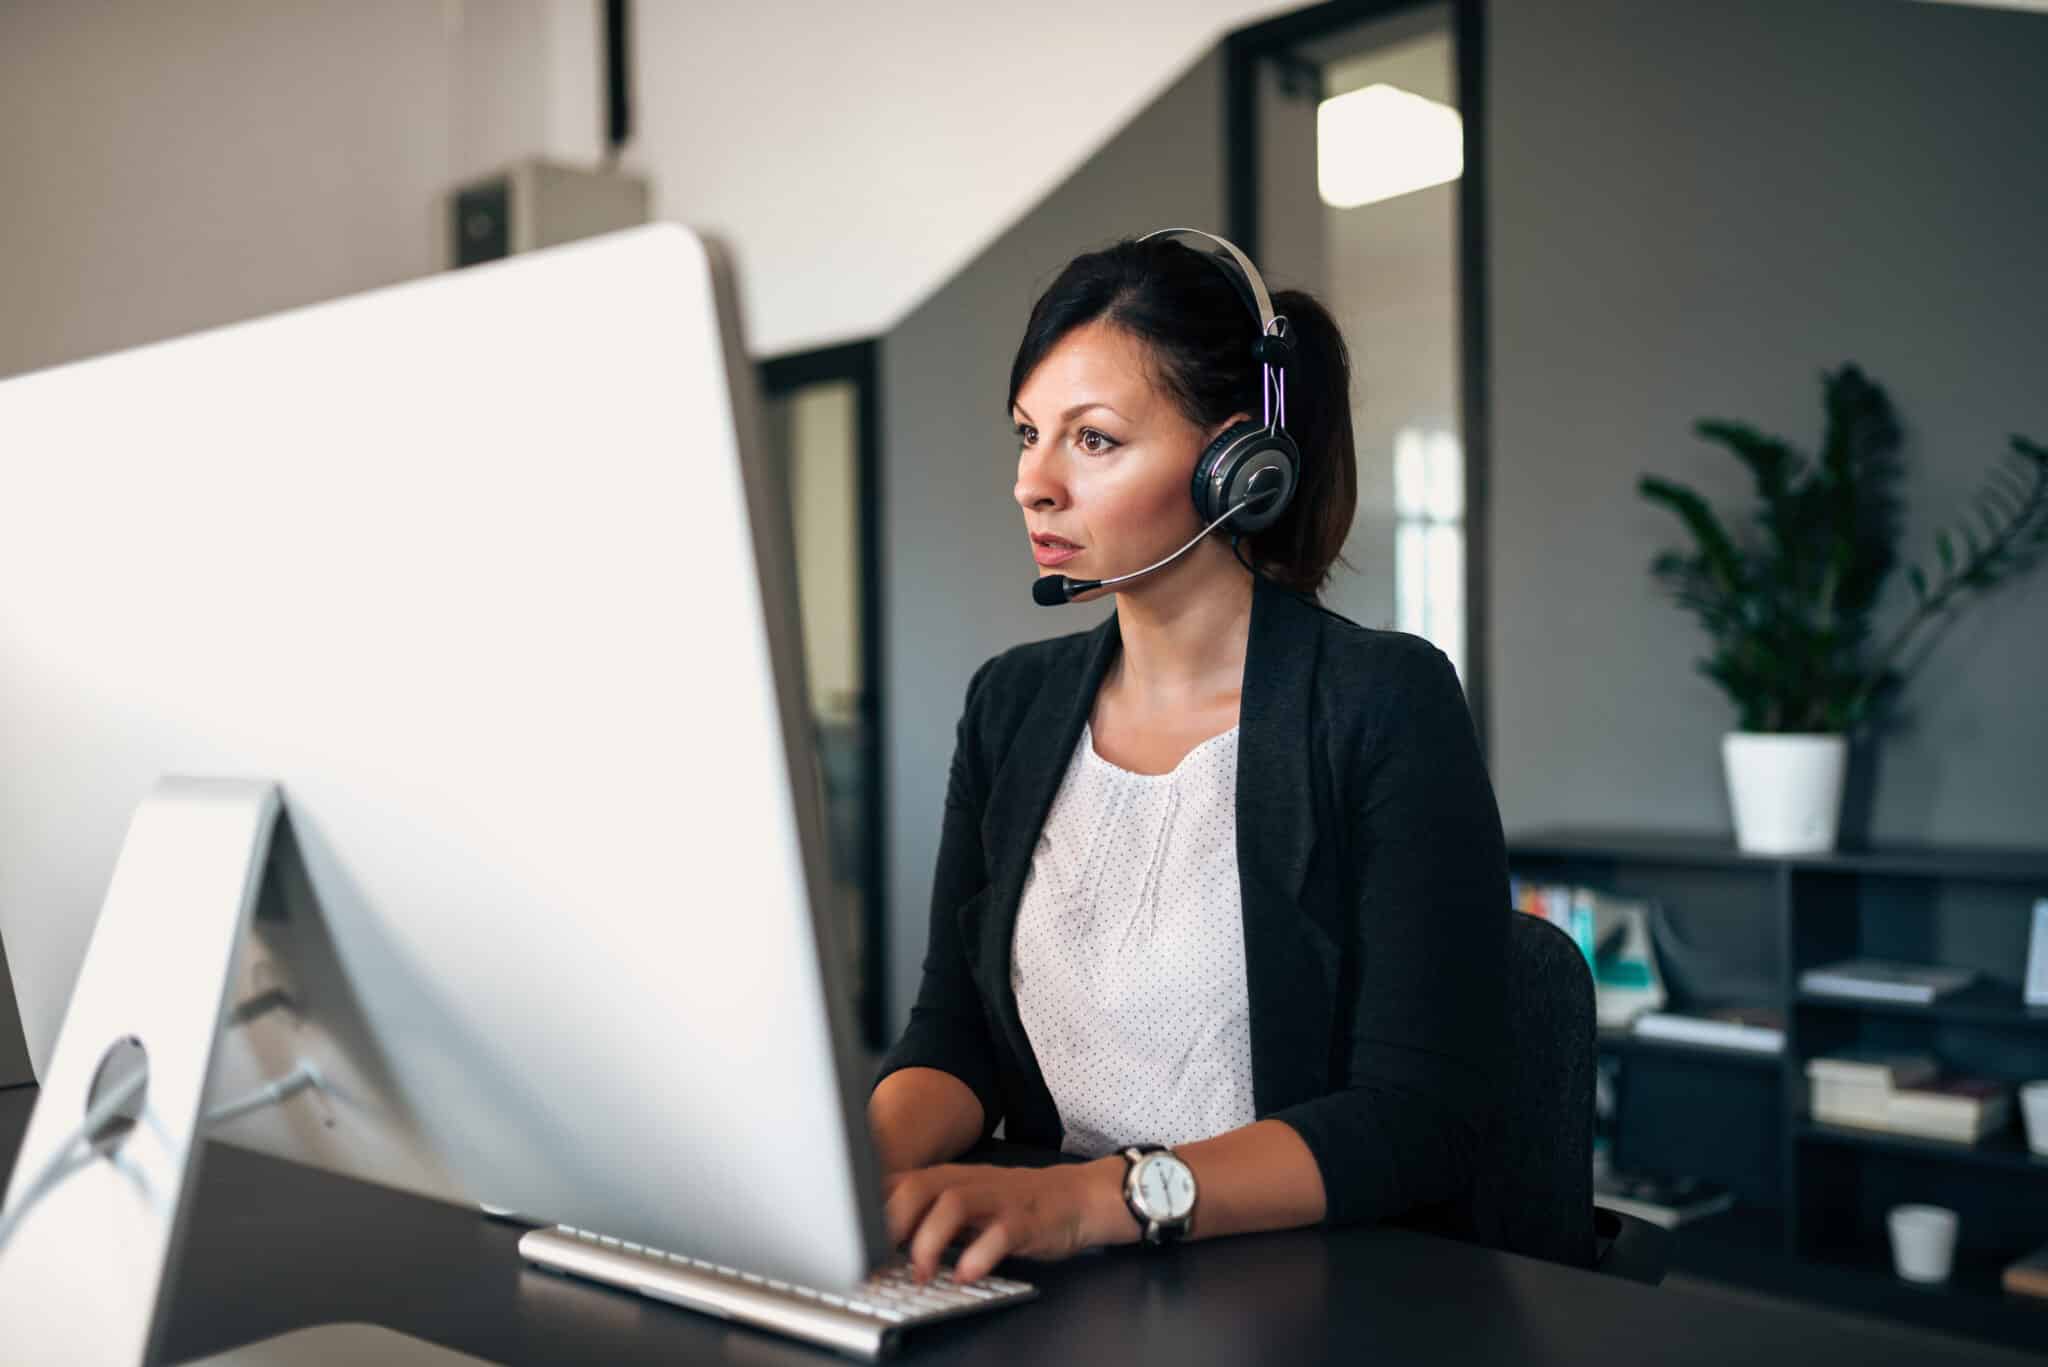 Photo of an agent wearing a headset, perhaps as part of an omnichannel contact center team